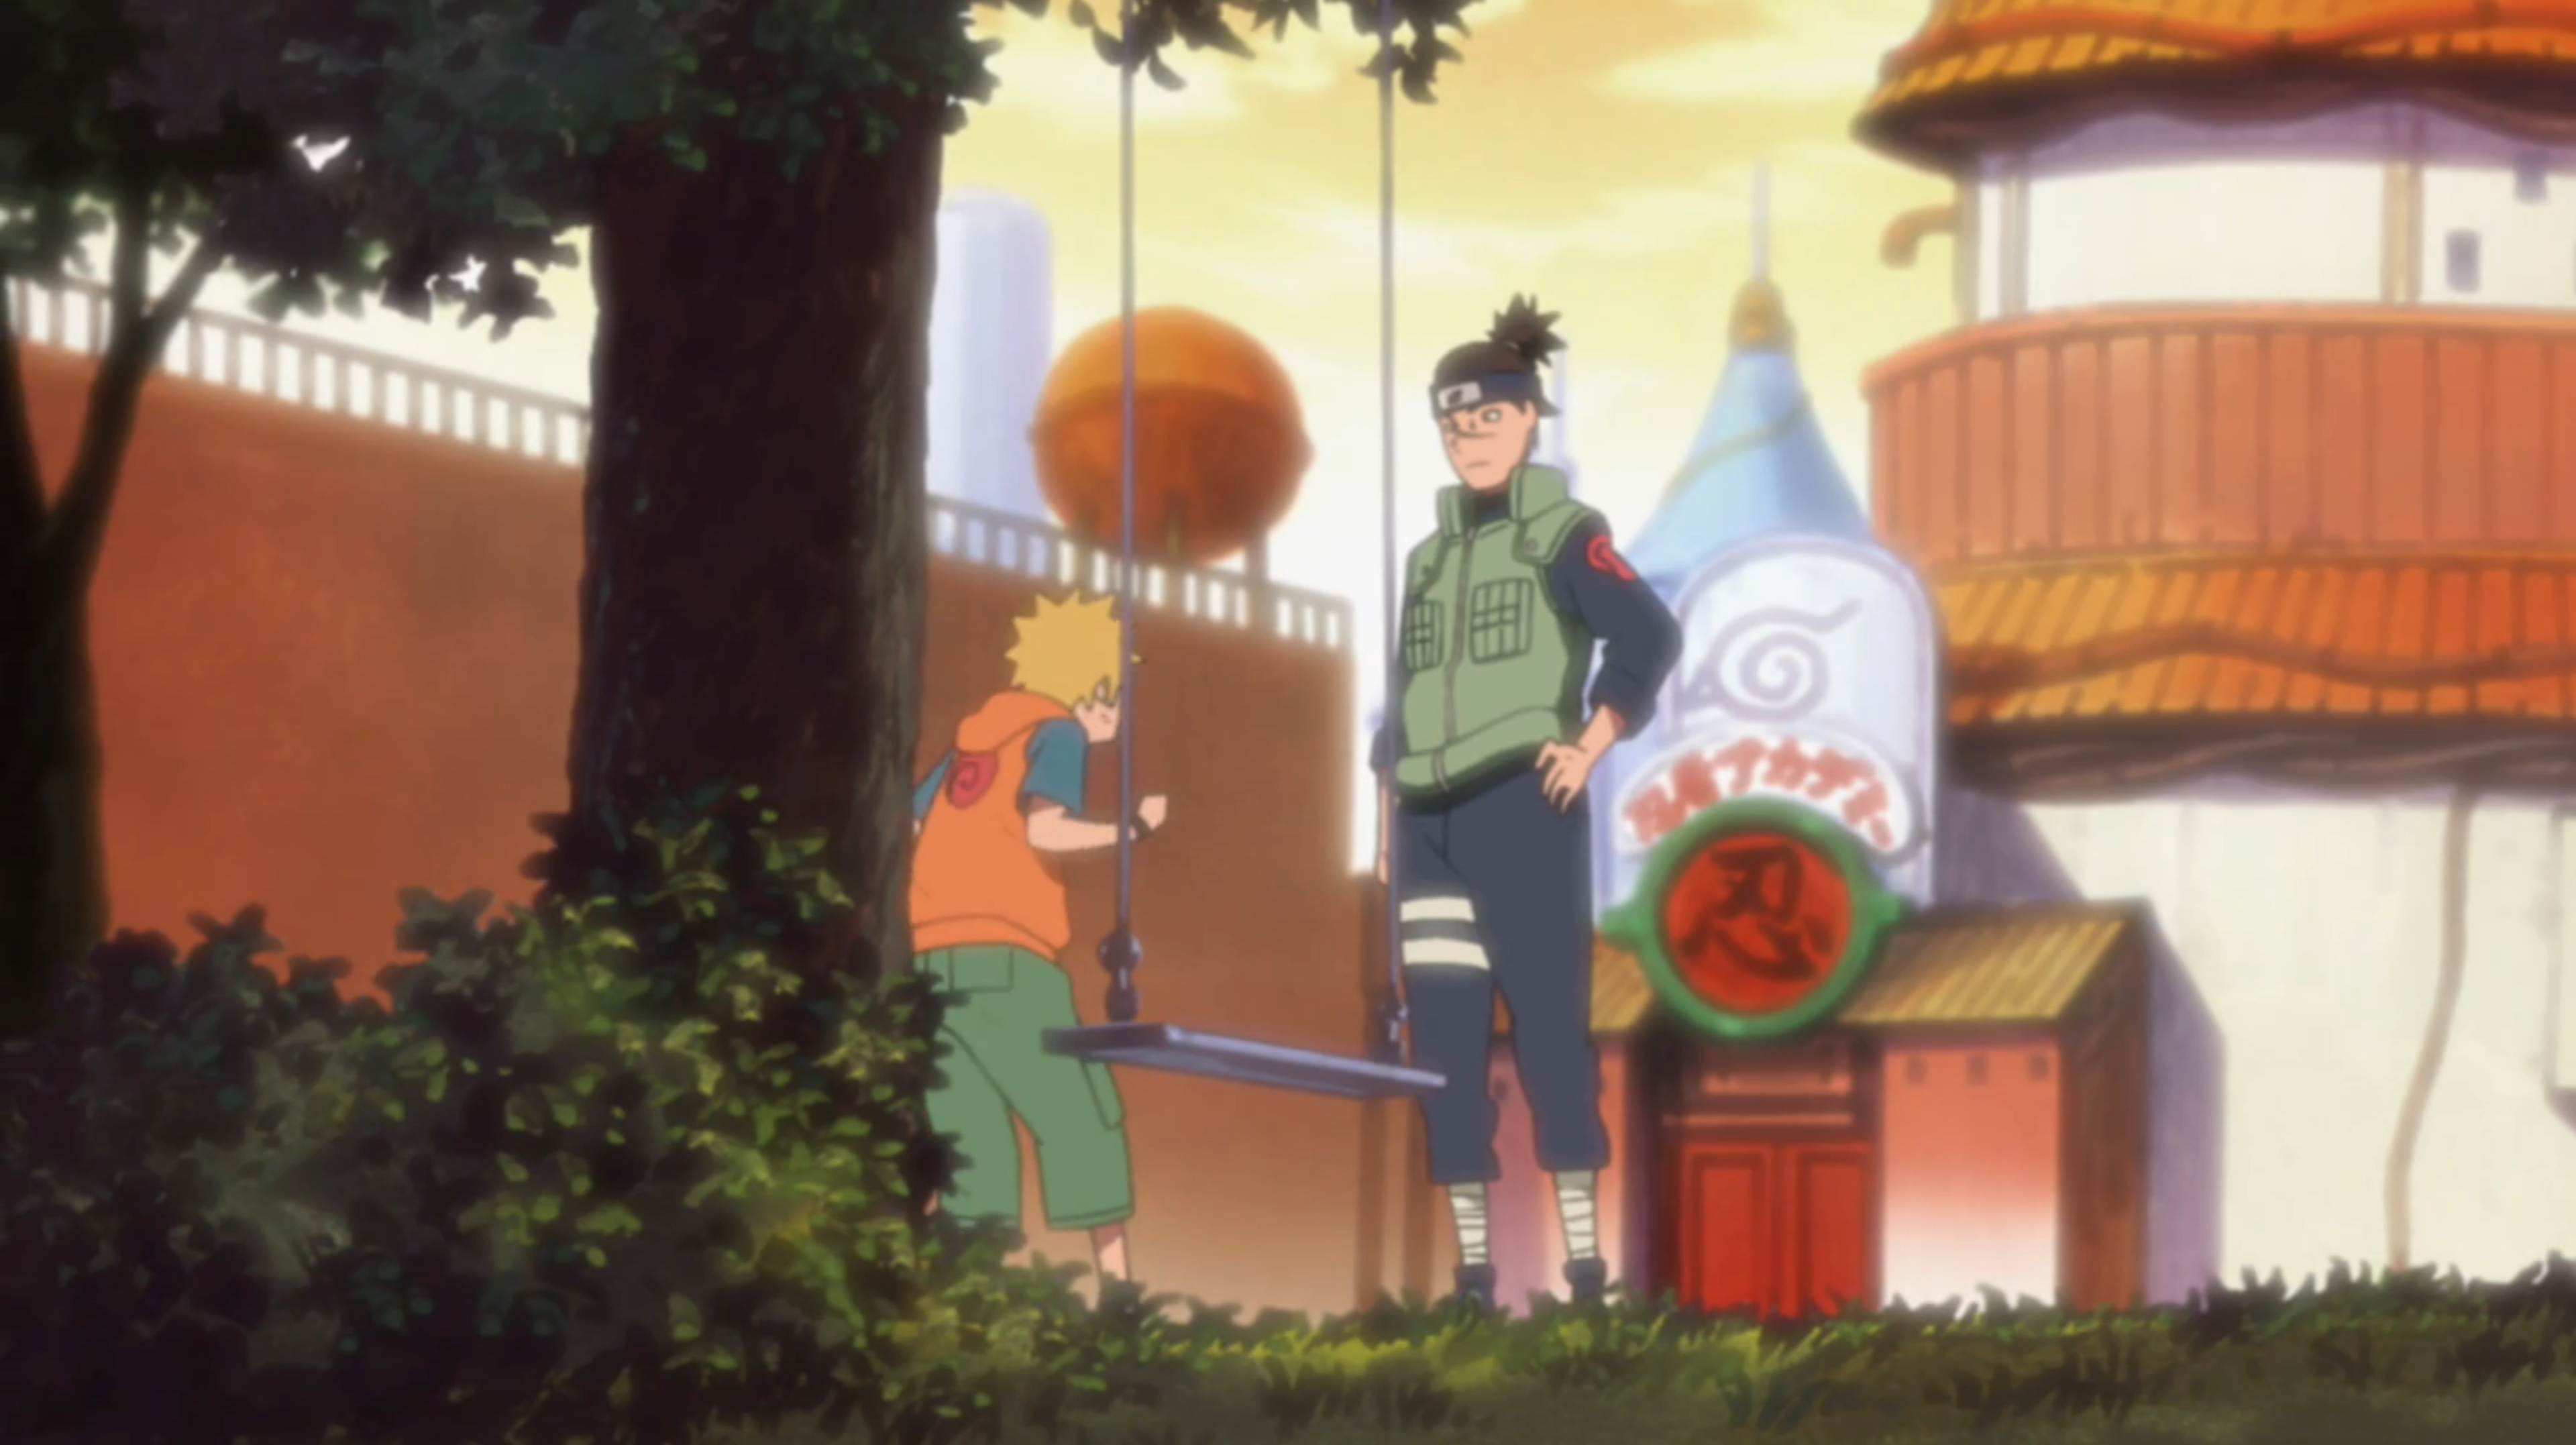 Naruto ask Iruka to fill out a jounin application for him: Road To